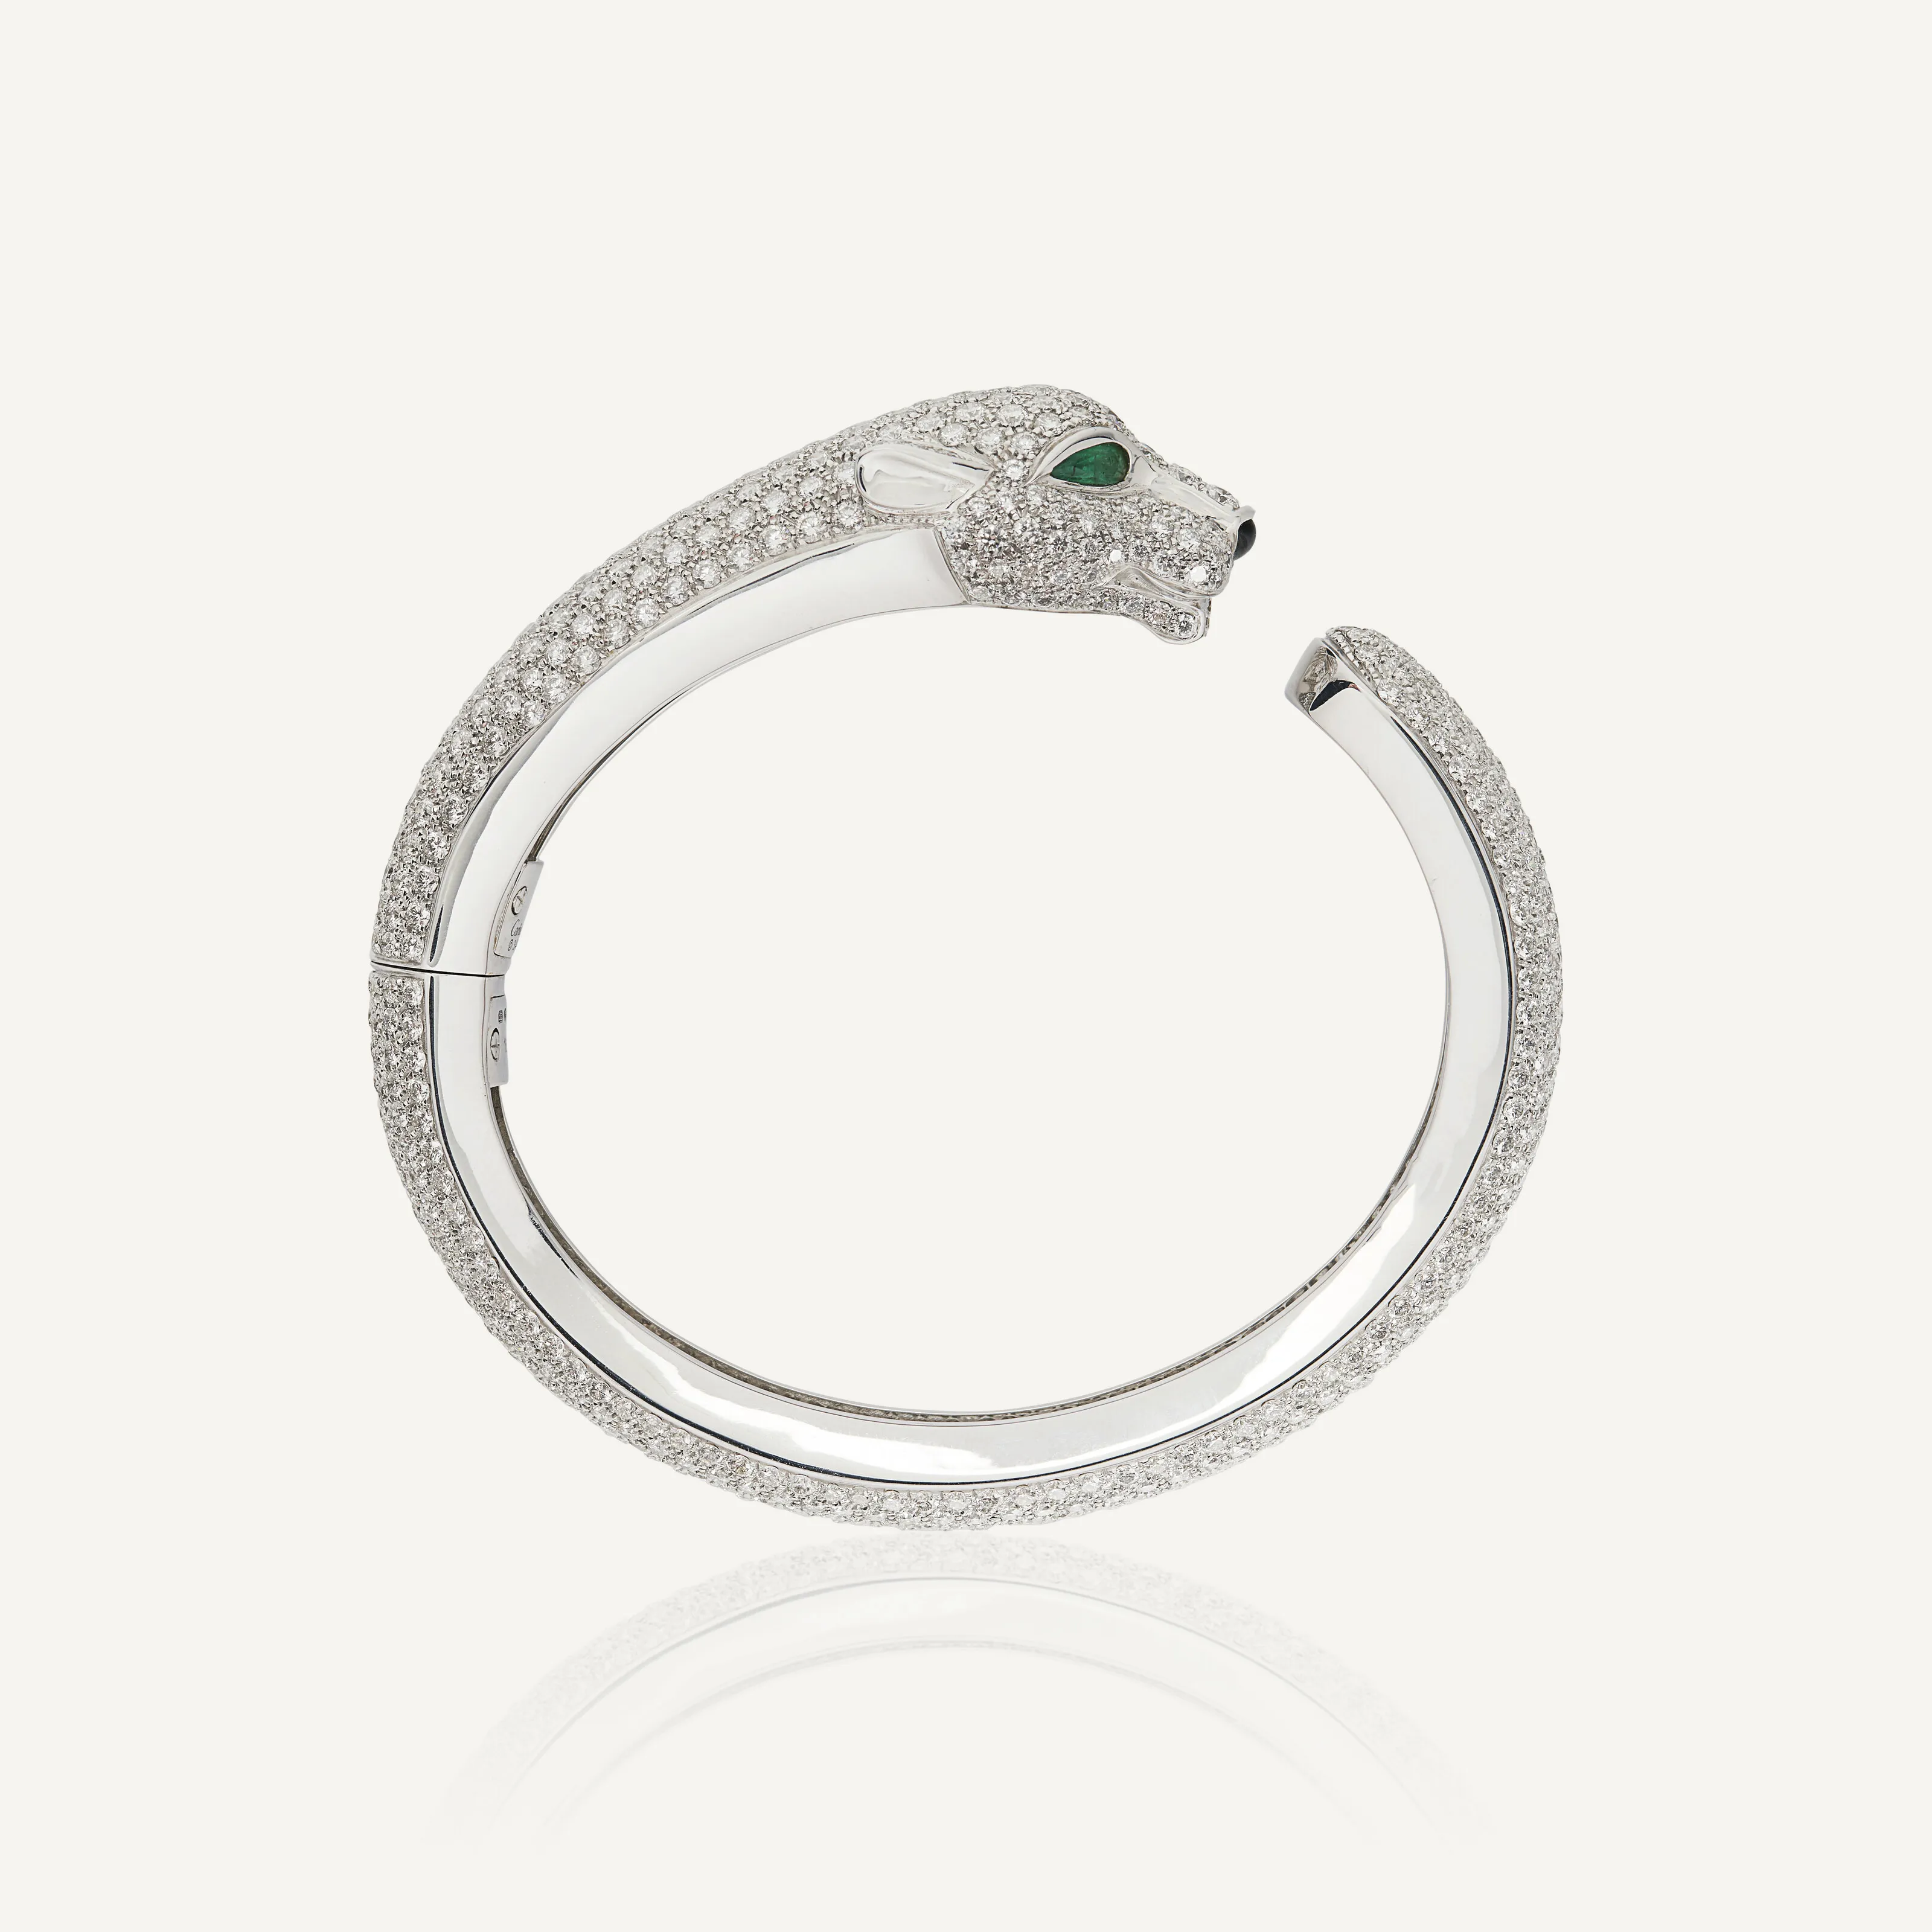 Cartier Panthère White gold, diamond, emerald and onyx 1